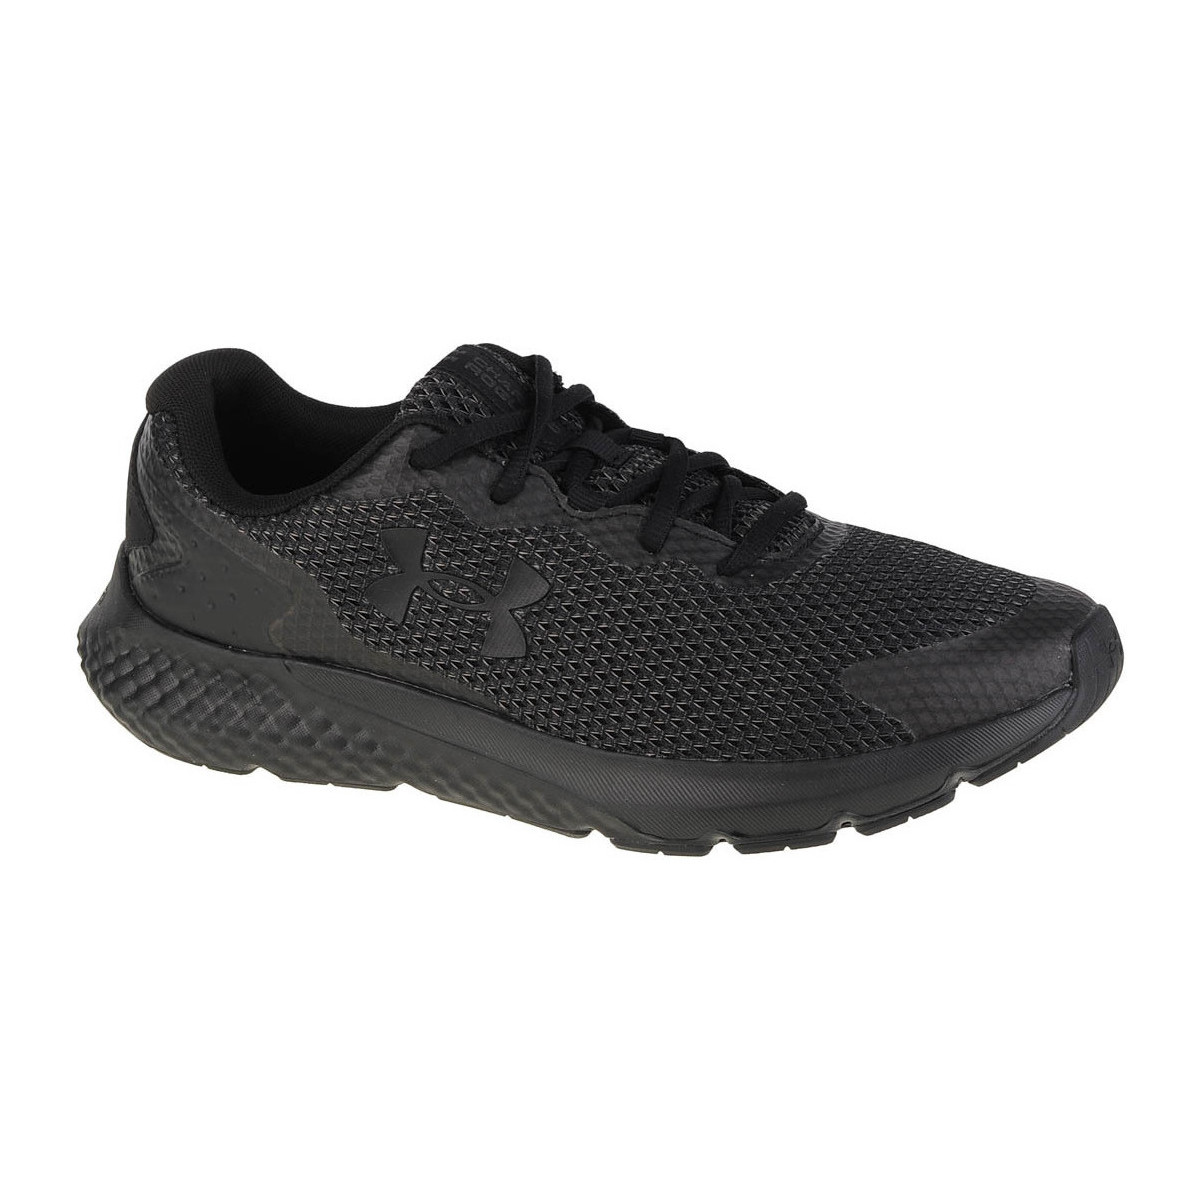 Chaussures Homme Running / trail Under Armour Charged Rogue 3 Noir